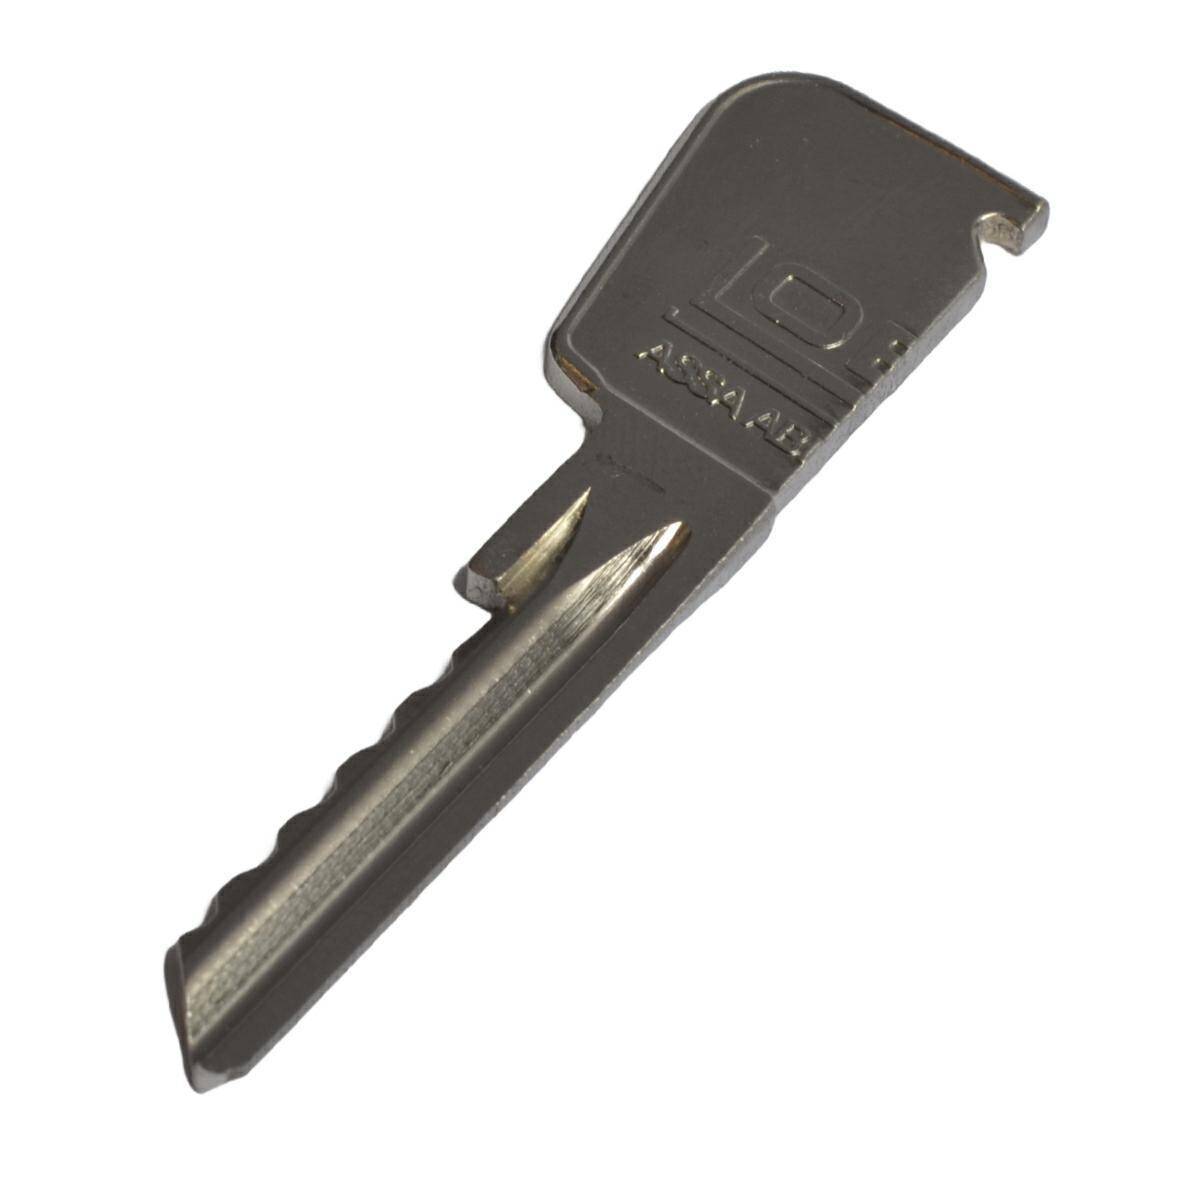 Service key for dismantling the insert LOB Ares